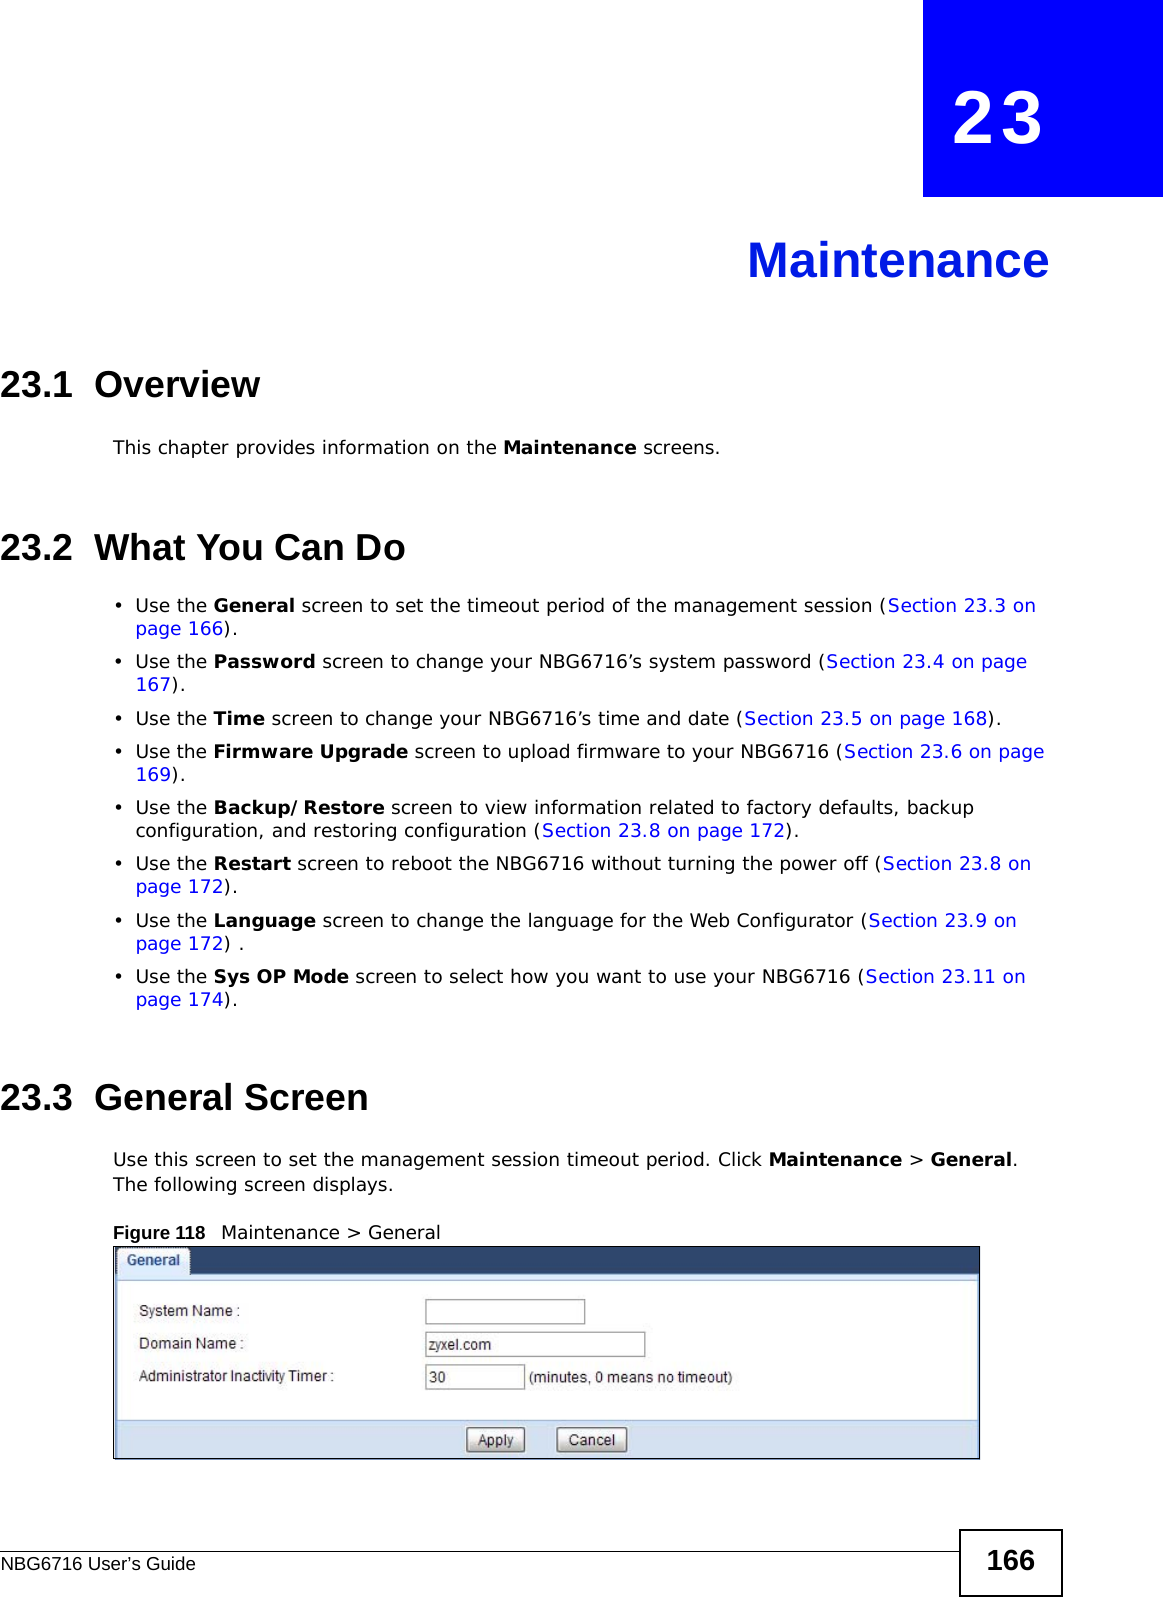 NBG6716 User’s Guide 166CHAPTER   23Maintenance23.1  OverviewThis chapter provides information on the Maintenance screens. 23.2  What You Can Do•Use the General screen to set the timeout period of the management session (Section 23.3 on page 166). •Use the Password screen to change your NBG6716’s system password (Section 23.4 on page 167).•Use the Time screen to change your NBG6716’s time and date (Section 23.5 on page 168).•Use the Firmware Upgrade screen to upload firmware to your NBG6716 (Section 23.6 on page 169).•Use the Backup/Restore screen to view information related to factory defaults, backup configuration, and restoring configuration (Section 23.8 on page 172).•Use the Restart screen to reboot the NBG6716 without turning the power off (Section 23.8 on page 172).•Use the Language screen to change the language for the Web Configurator (Section 23.9 on page 172) .•Use the Sys OP Mode screen to select how you want to use your NBG6716 (Section 23.11 on page 174). 23.3  General Screen Use this screen to set the management session timeout period. Click Maintenance &gt; General. The following screen displays.Figure 118   Maintenance &gt; General 